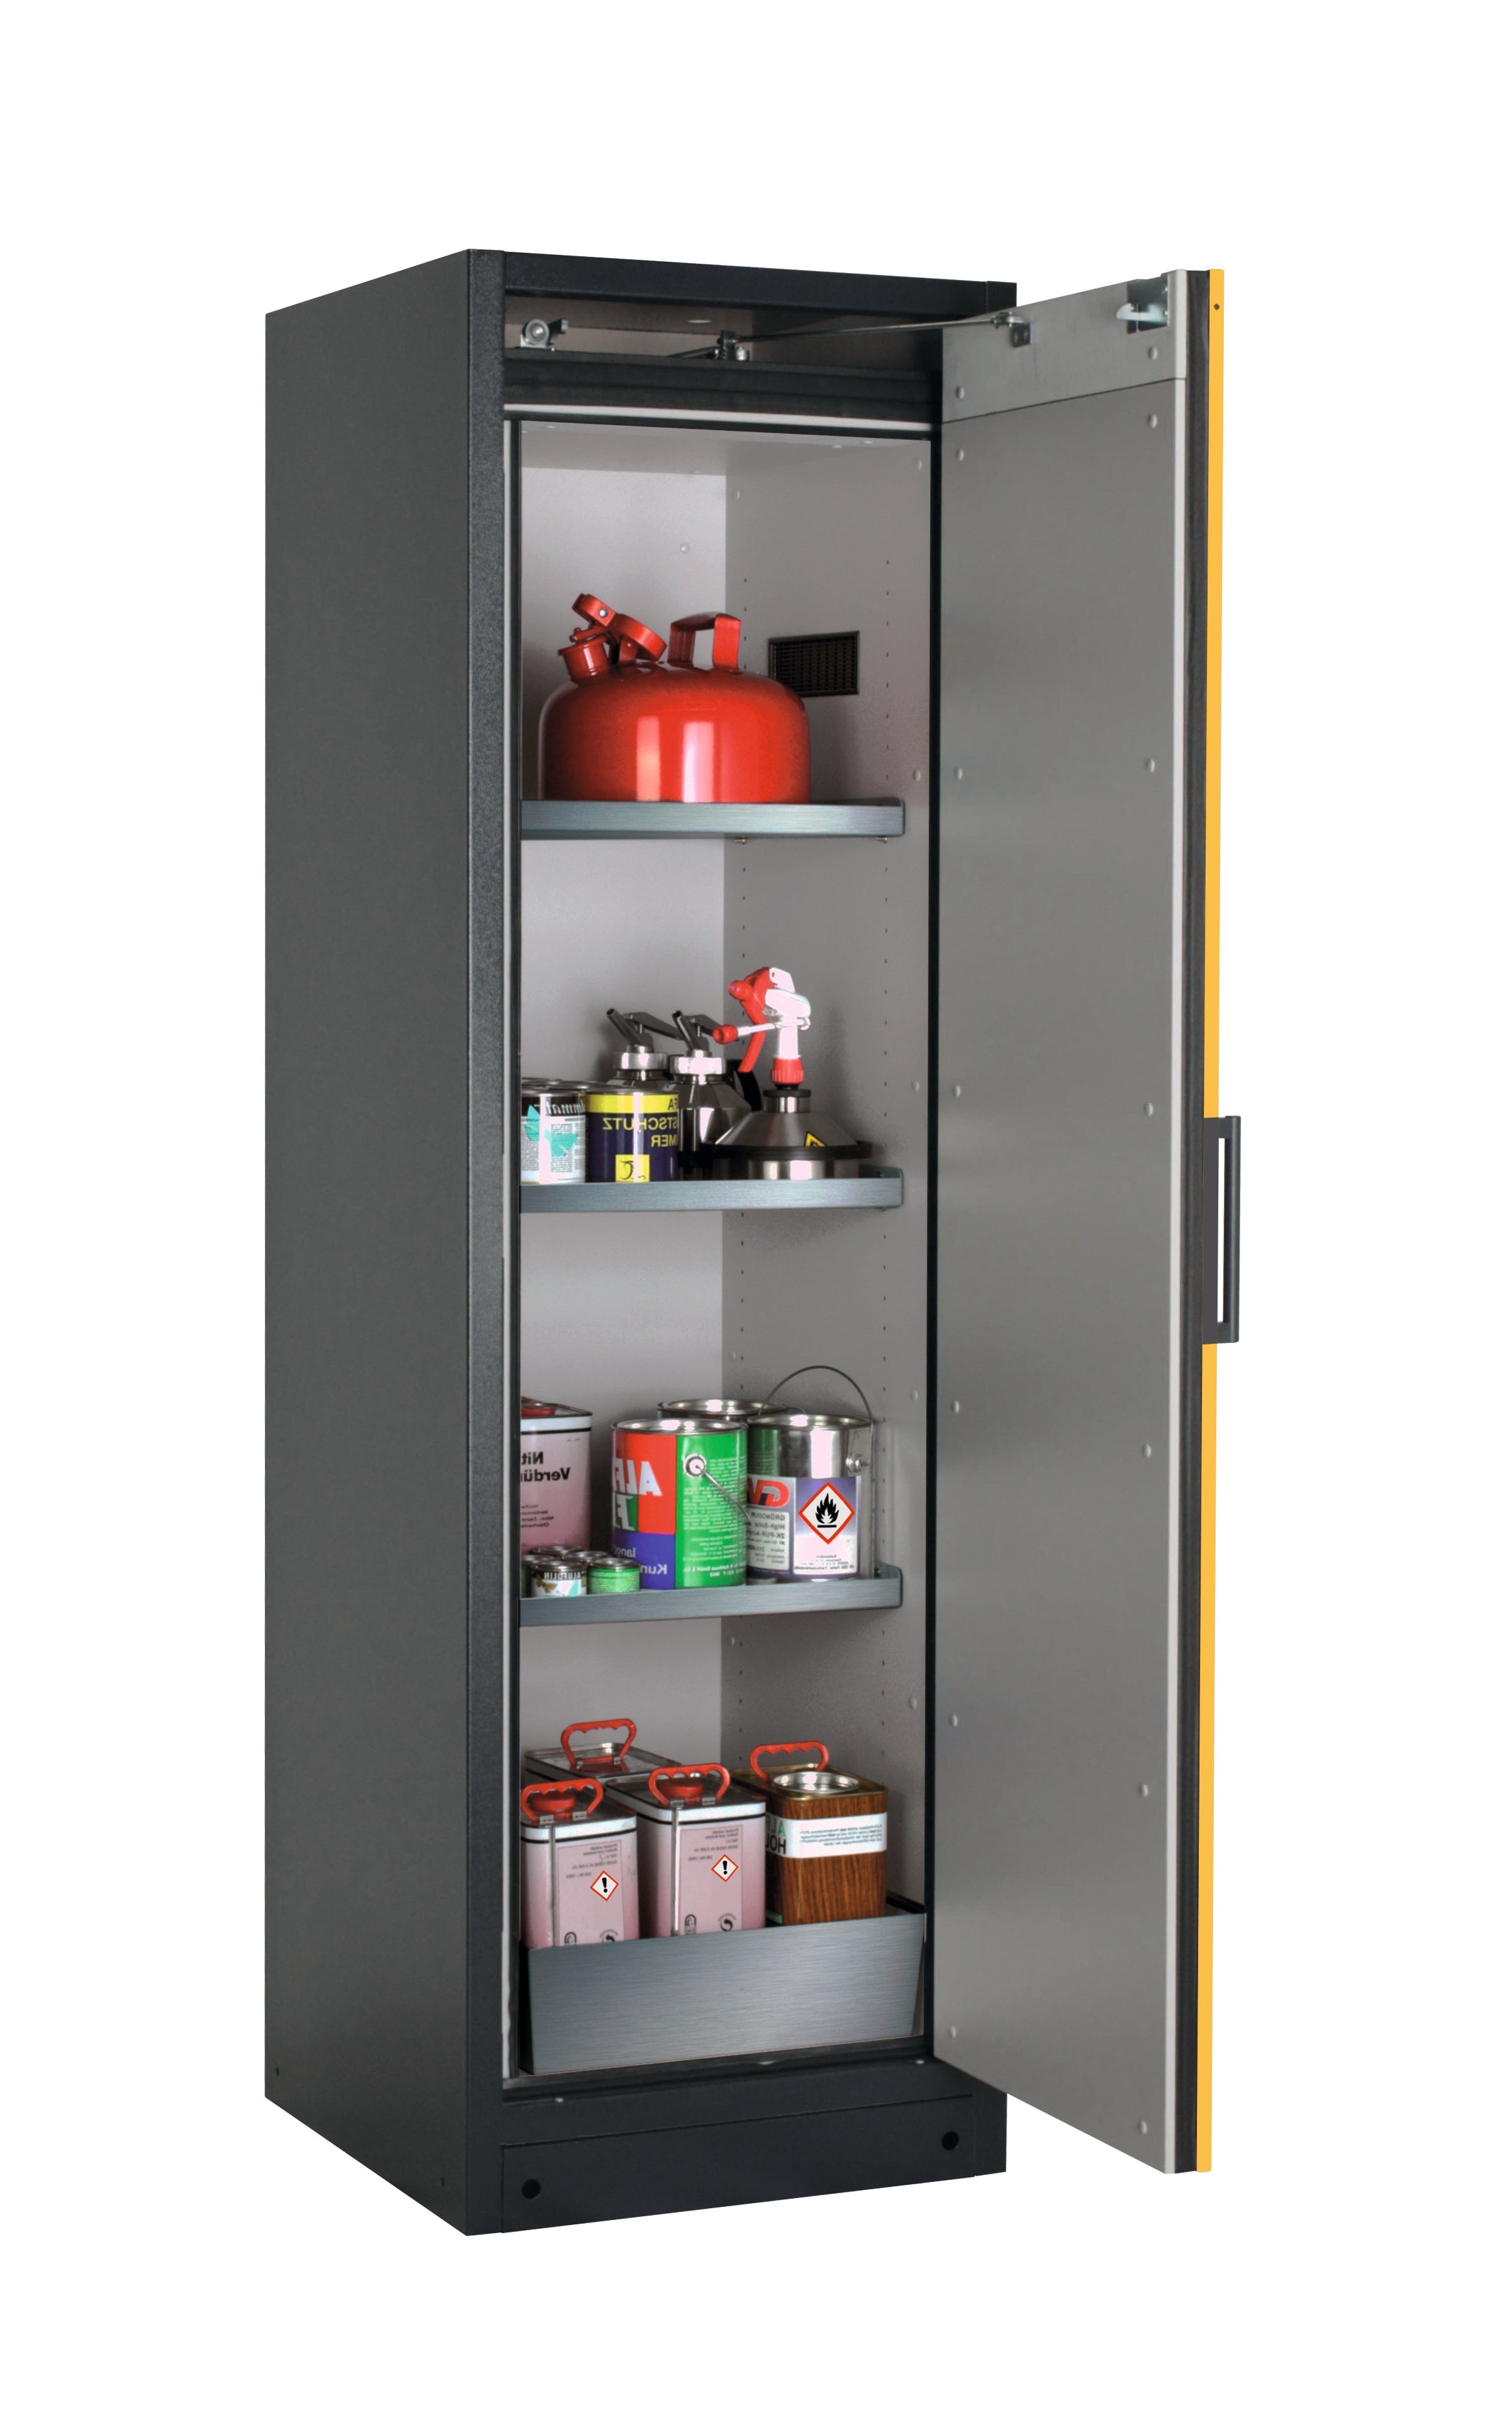 Type 90 safety storage cabinet Q-CLASSIC-90 model Q90.195.060.R in warning yellow RAL 1004 with 3x shelf standard (stainless steel 1.4301),